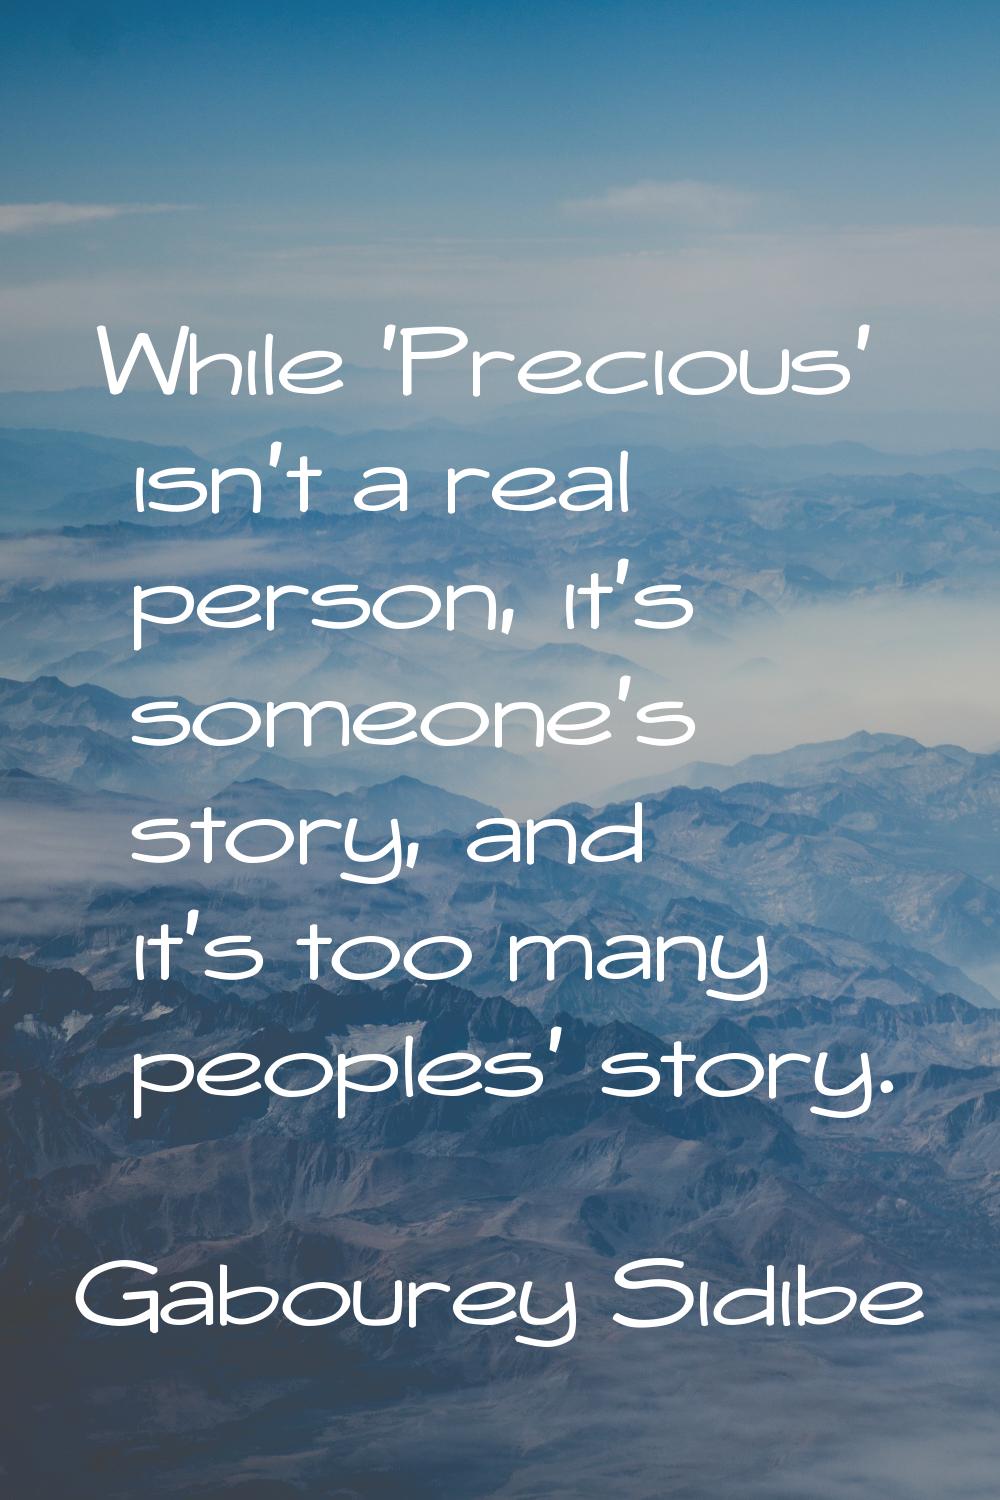 While 'Precious' isn't a real person, it's someone's story, and it's too many peoples' story.